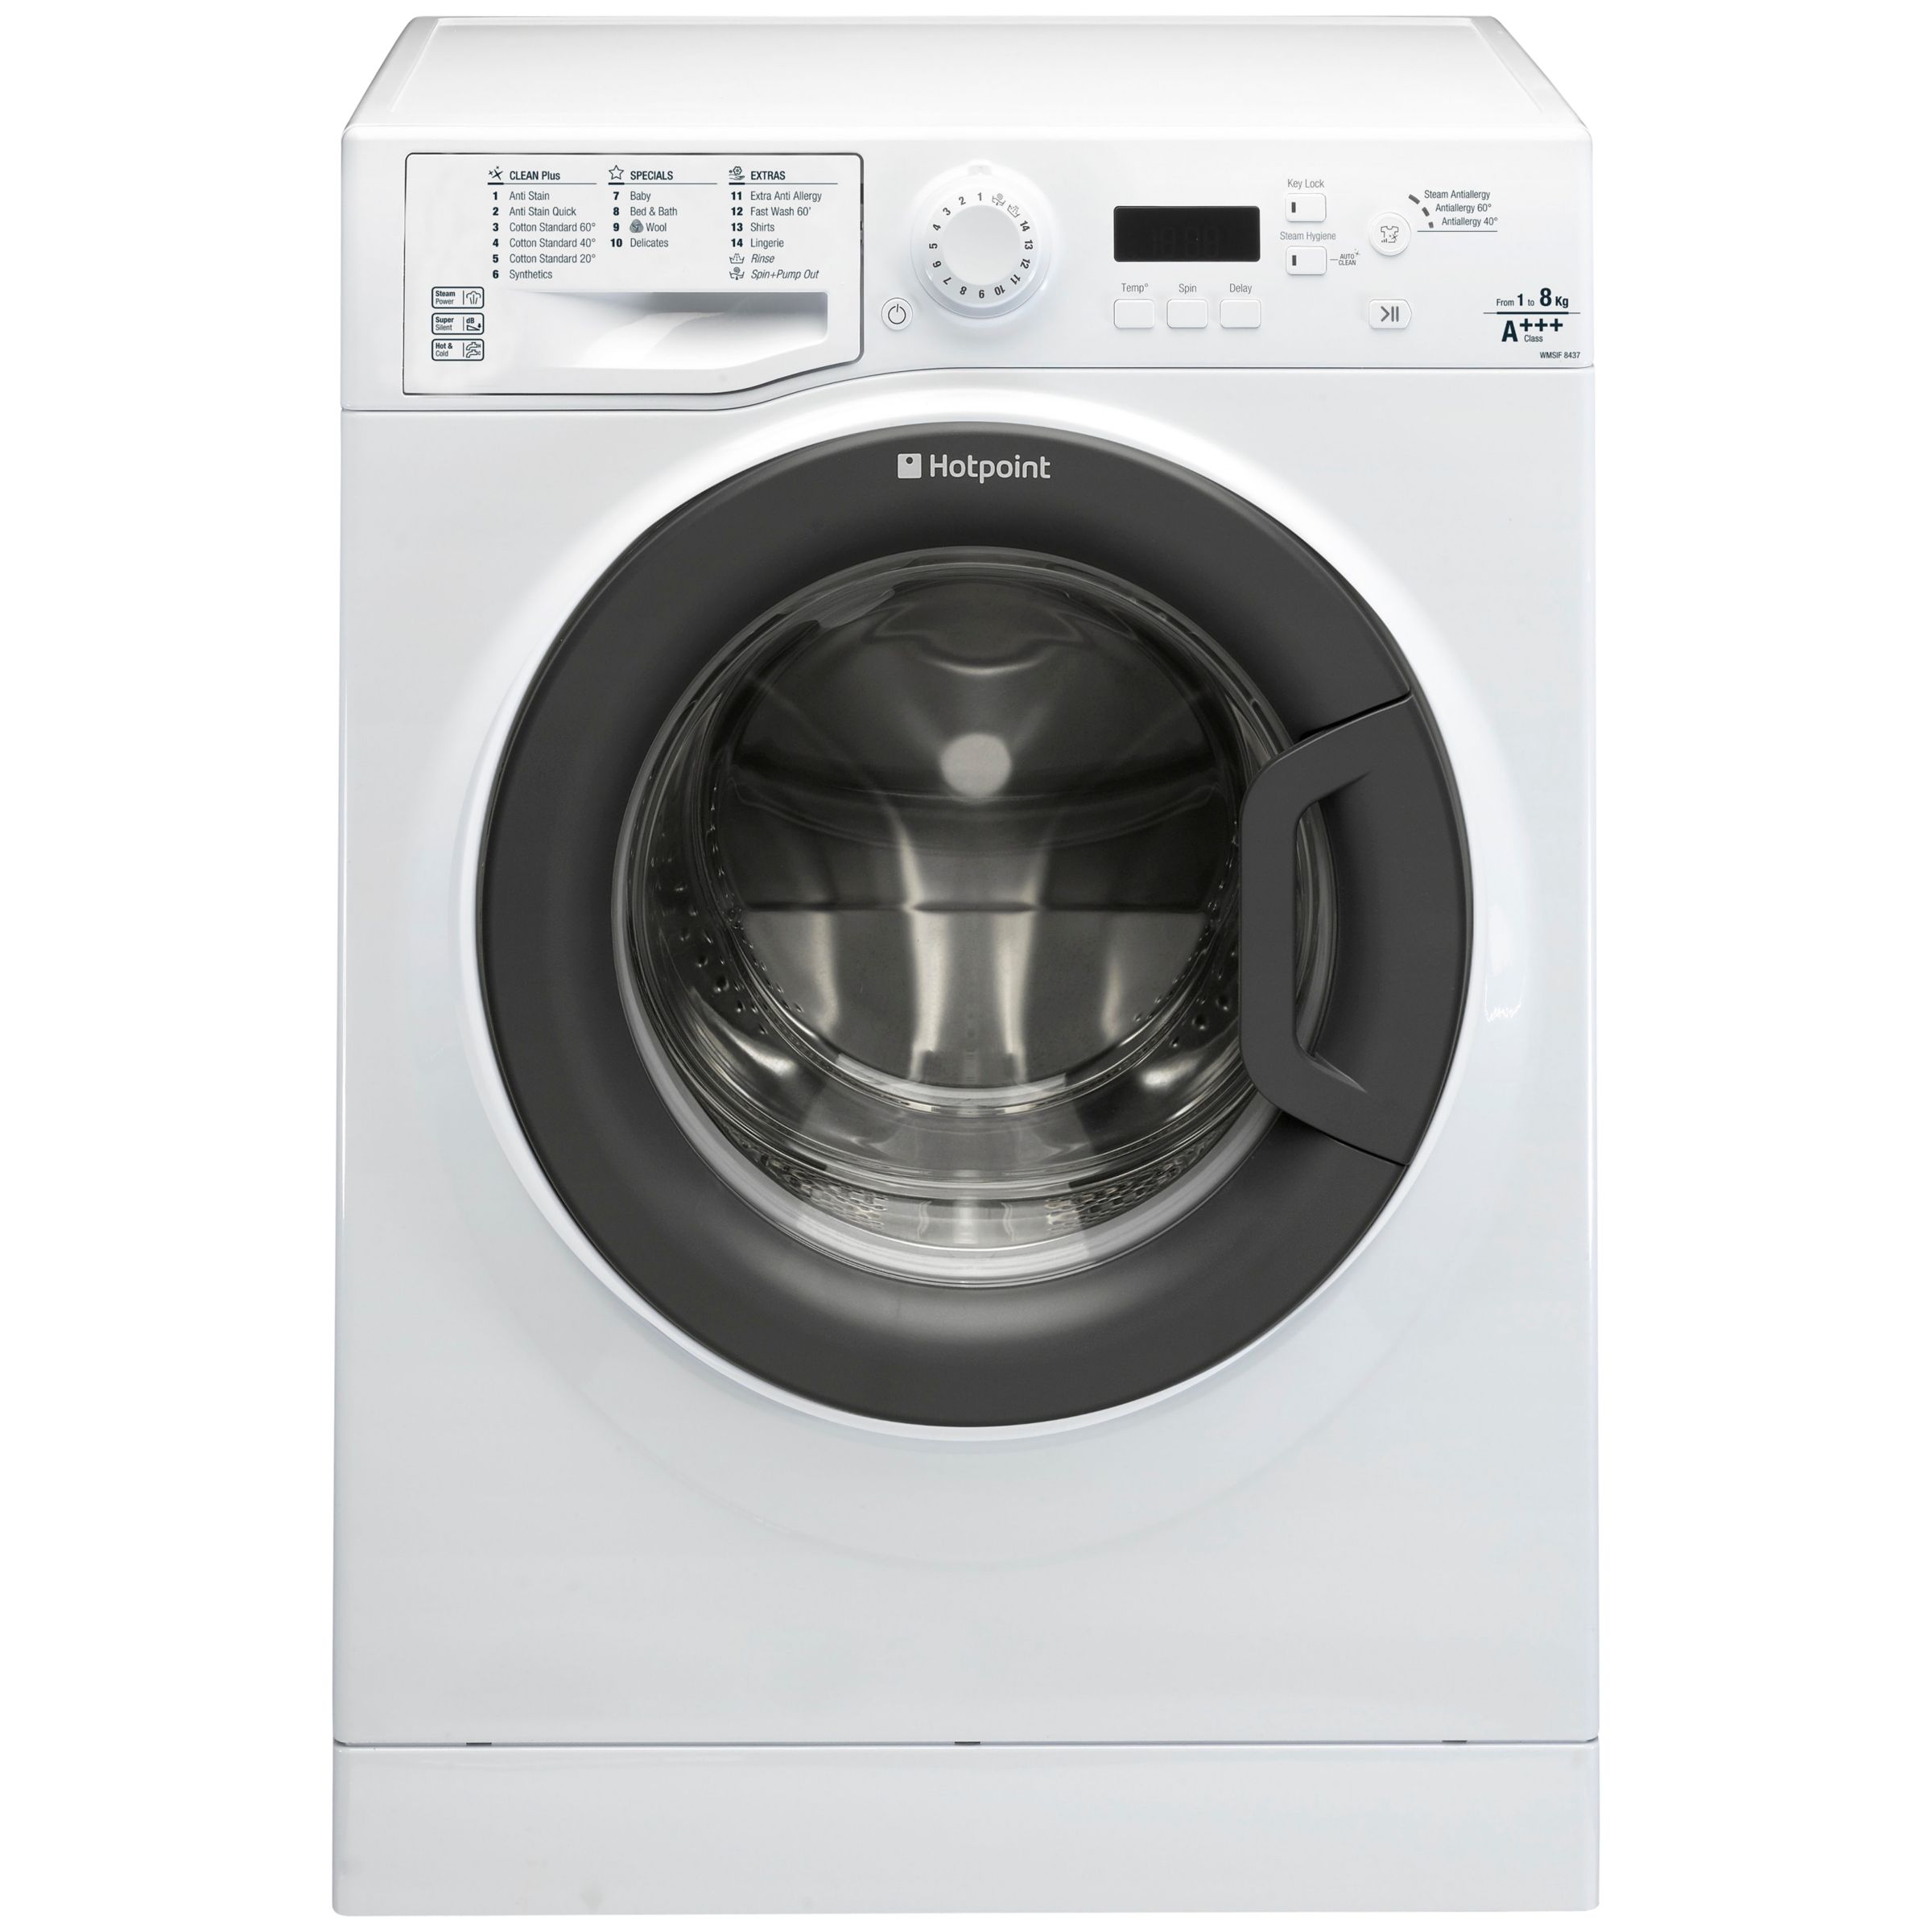 Hotpoint Signature WMSIF8437BC Freestanding Washing Machine, 8kg Load, A+++ Energy Rating, 1400rpm Spin, Polar White / Graphite